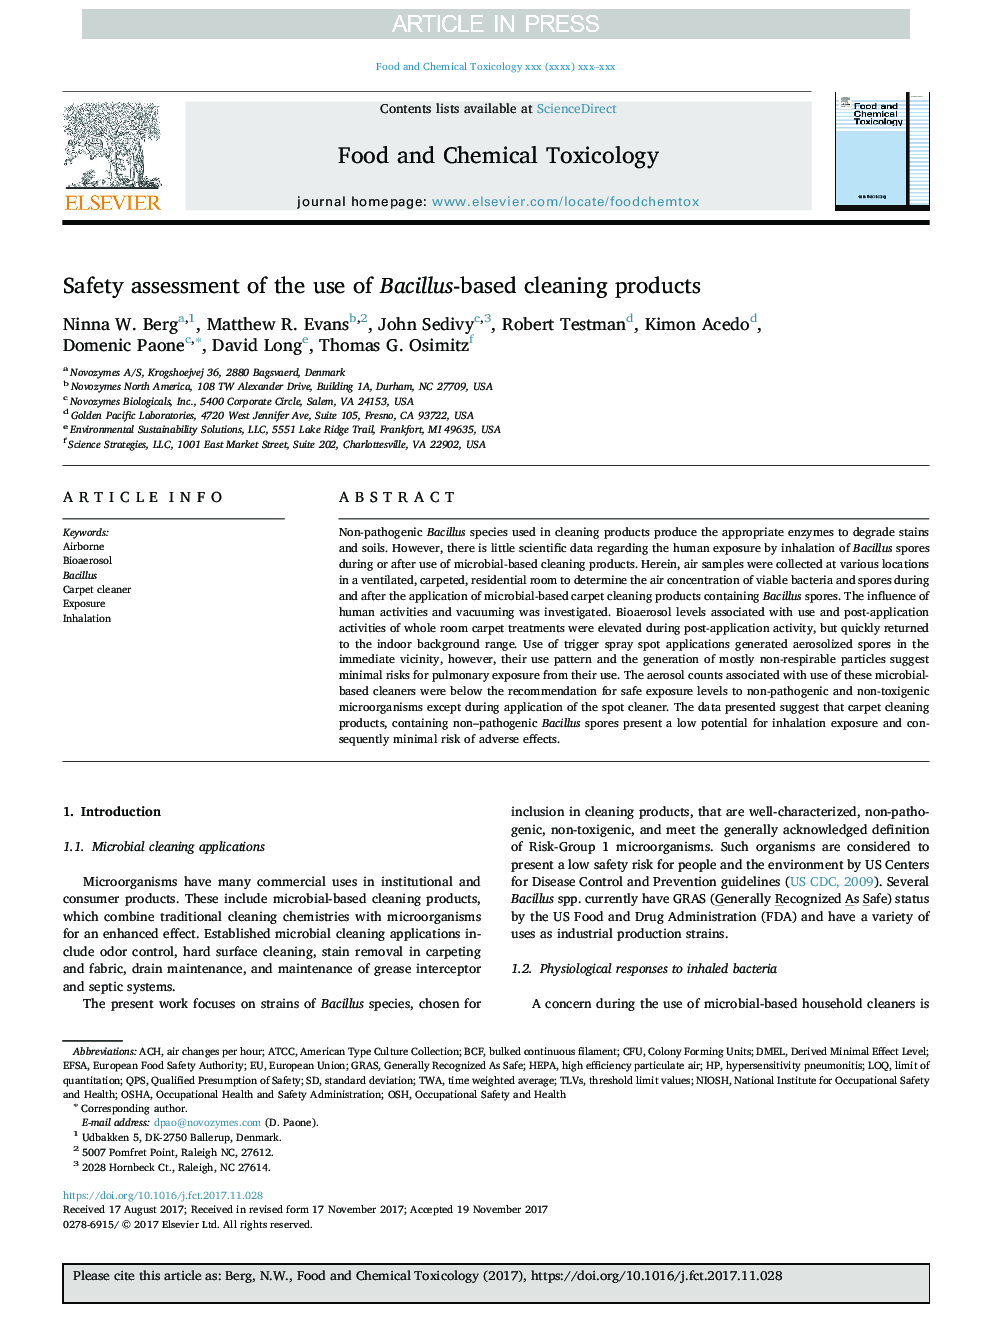 Safety assessment of the use of Bacillus-based cleaning products